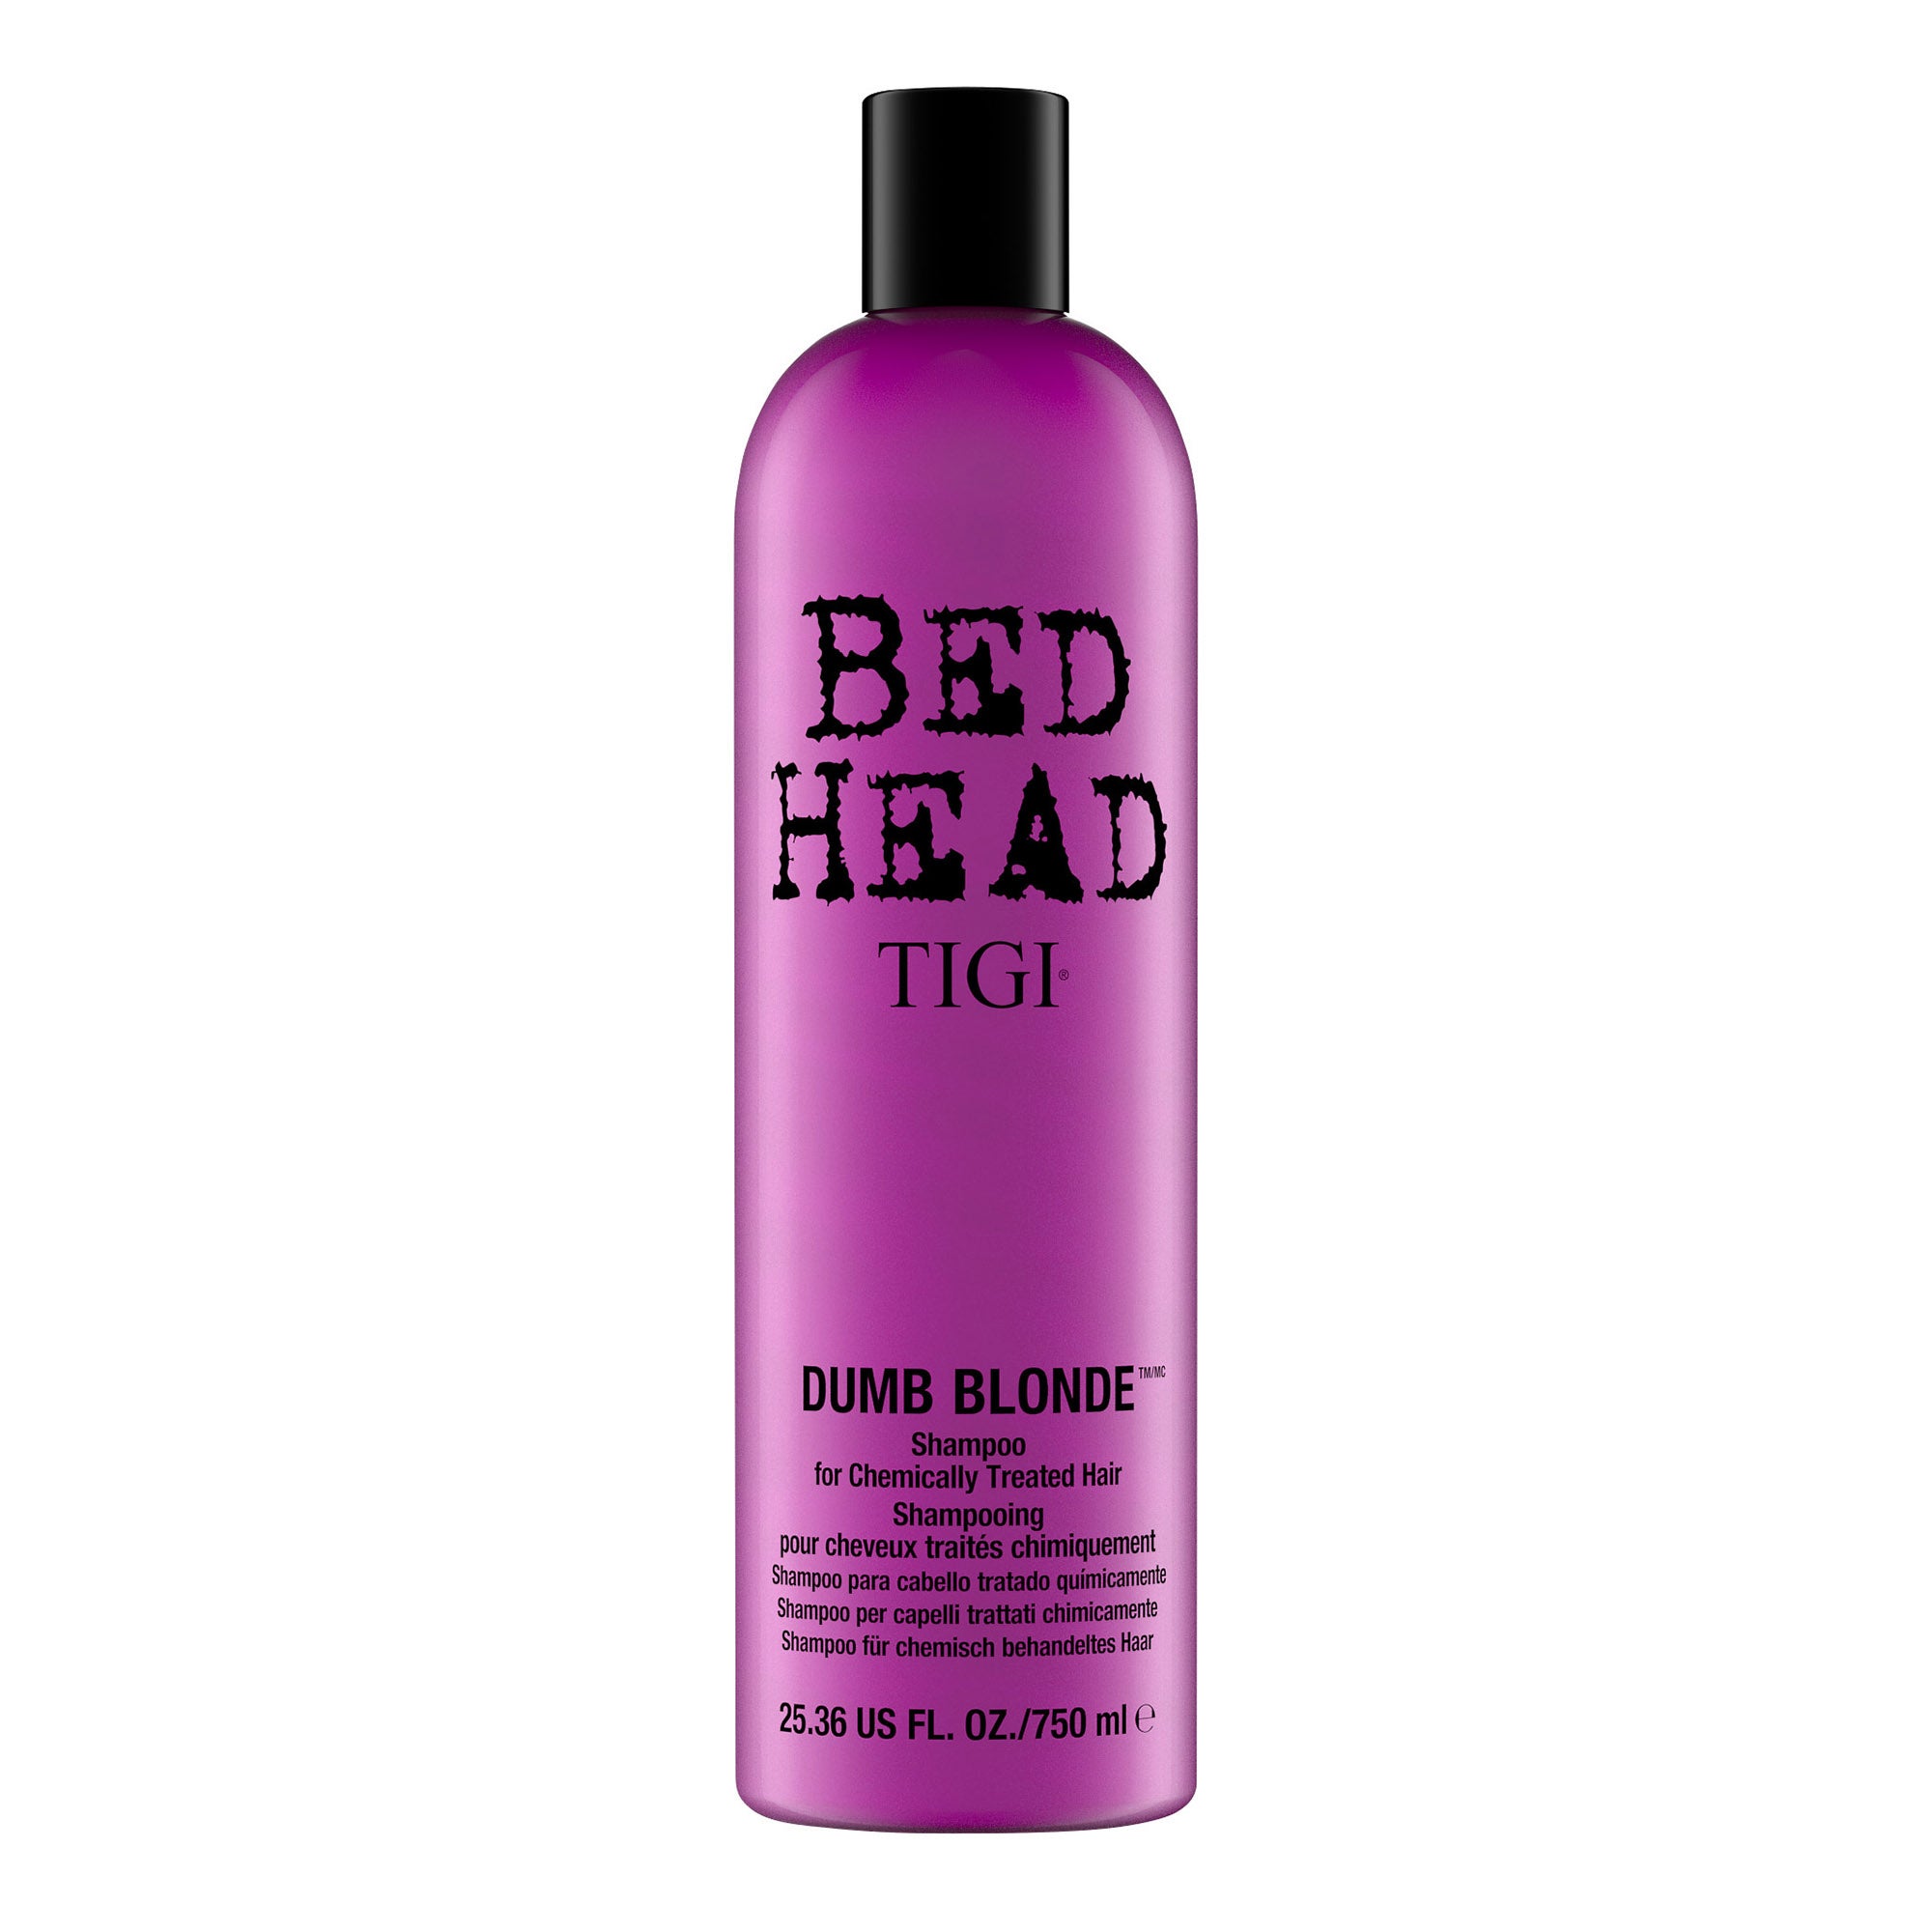 TIGI Bed Head Hair Care & Styling Products: Shampoos Conditioners Sprays  Creams